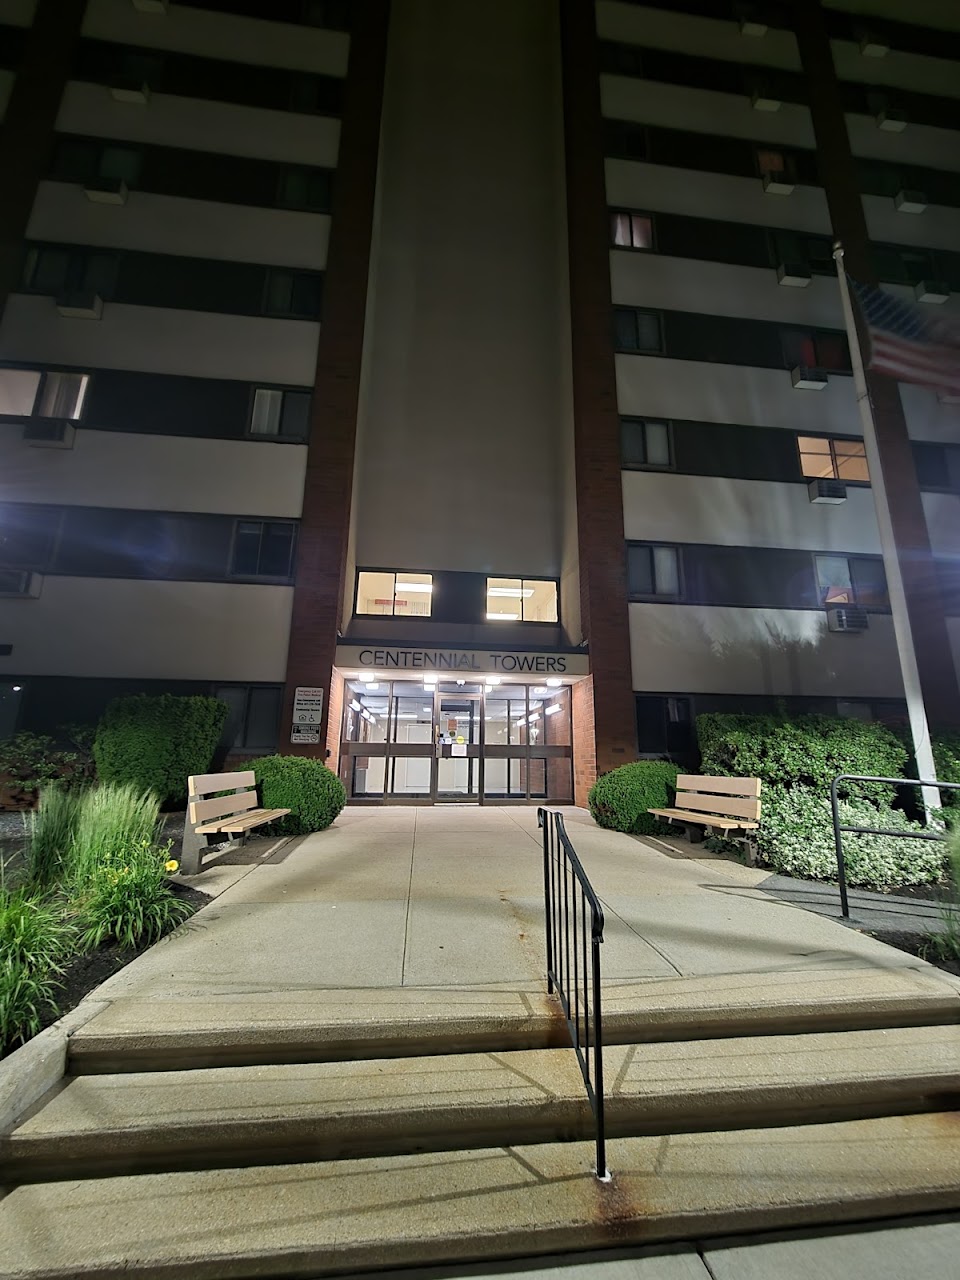 Photo of CENTENNIAL TOWERS at 35 GOFF AVE PAWTUCKET, RI 02860